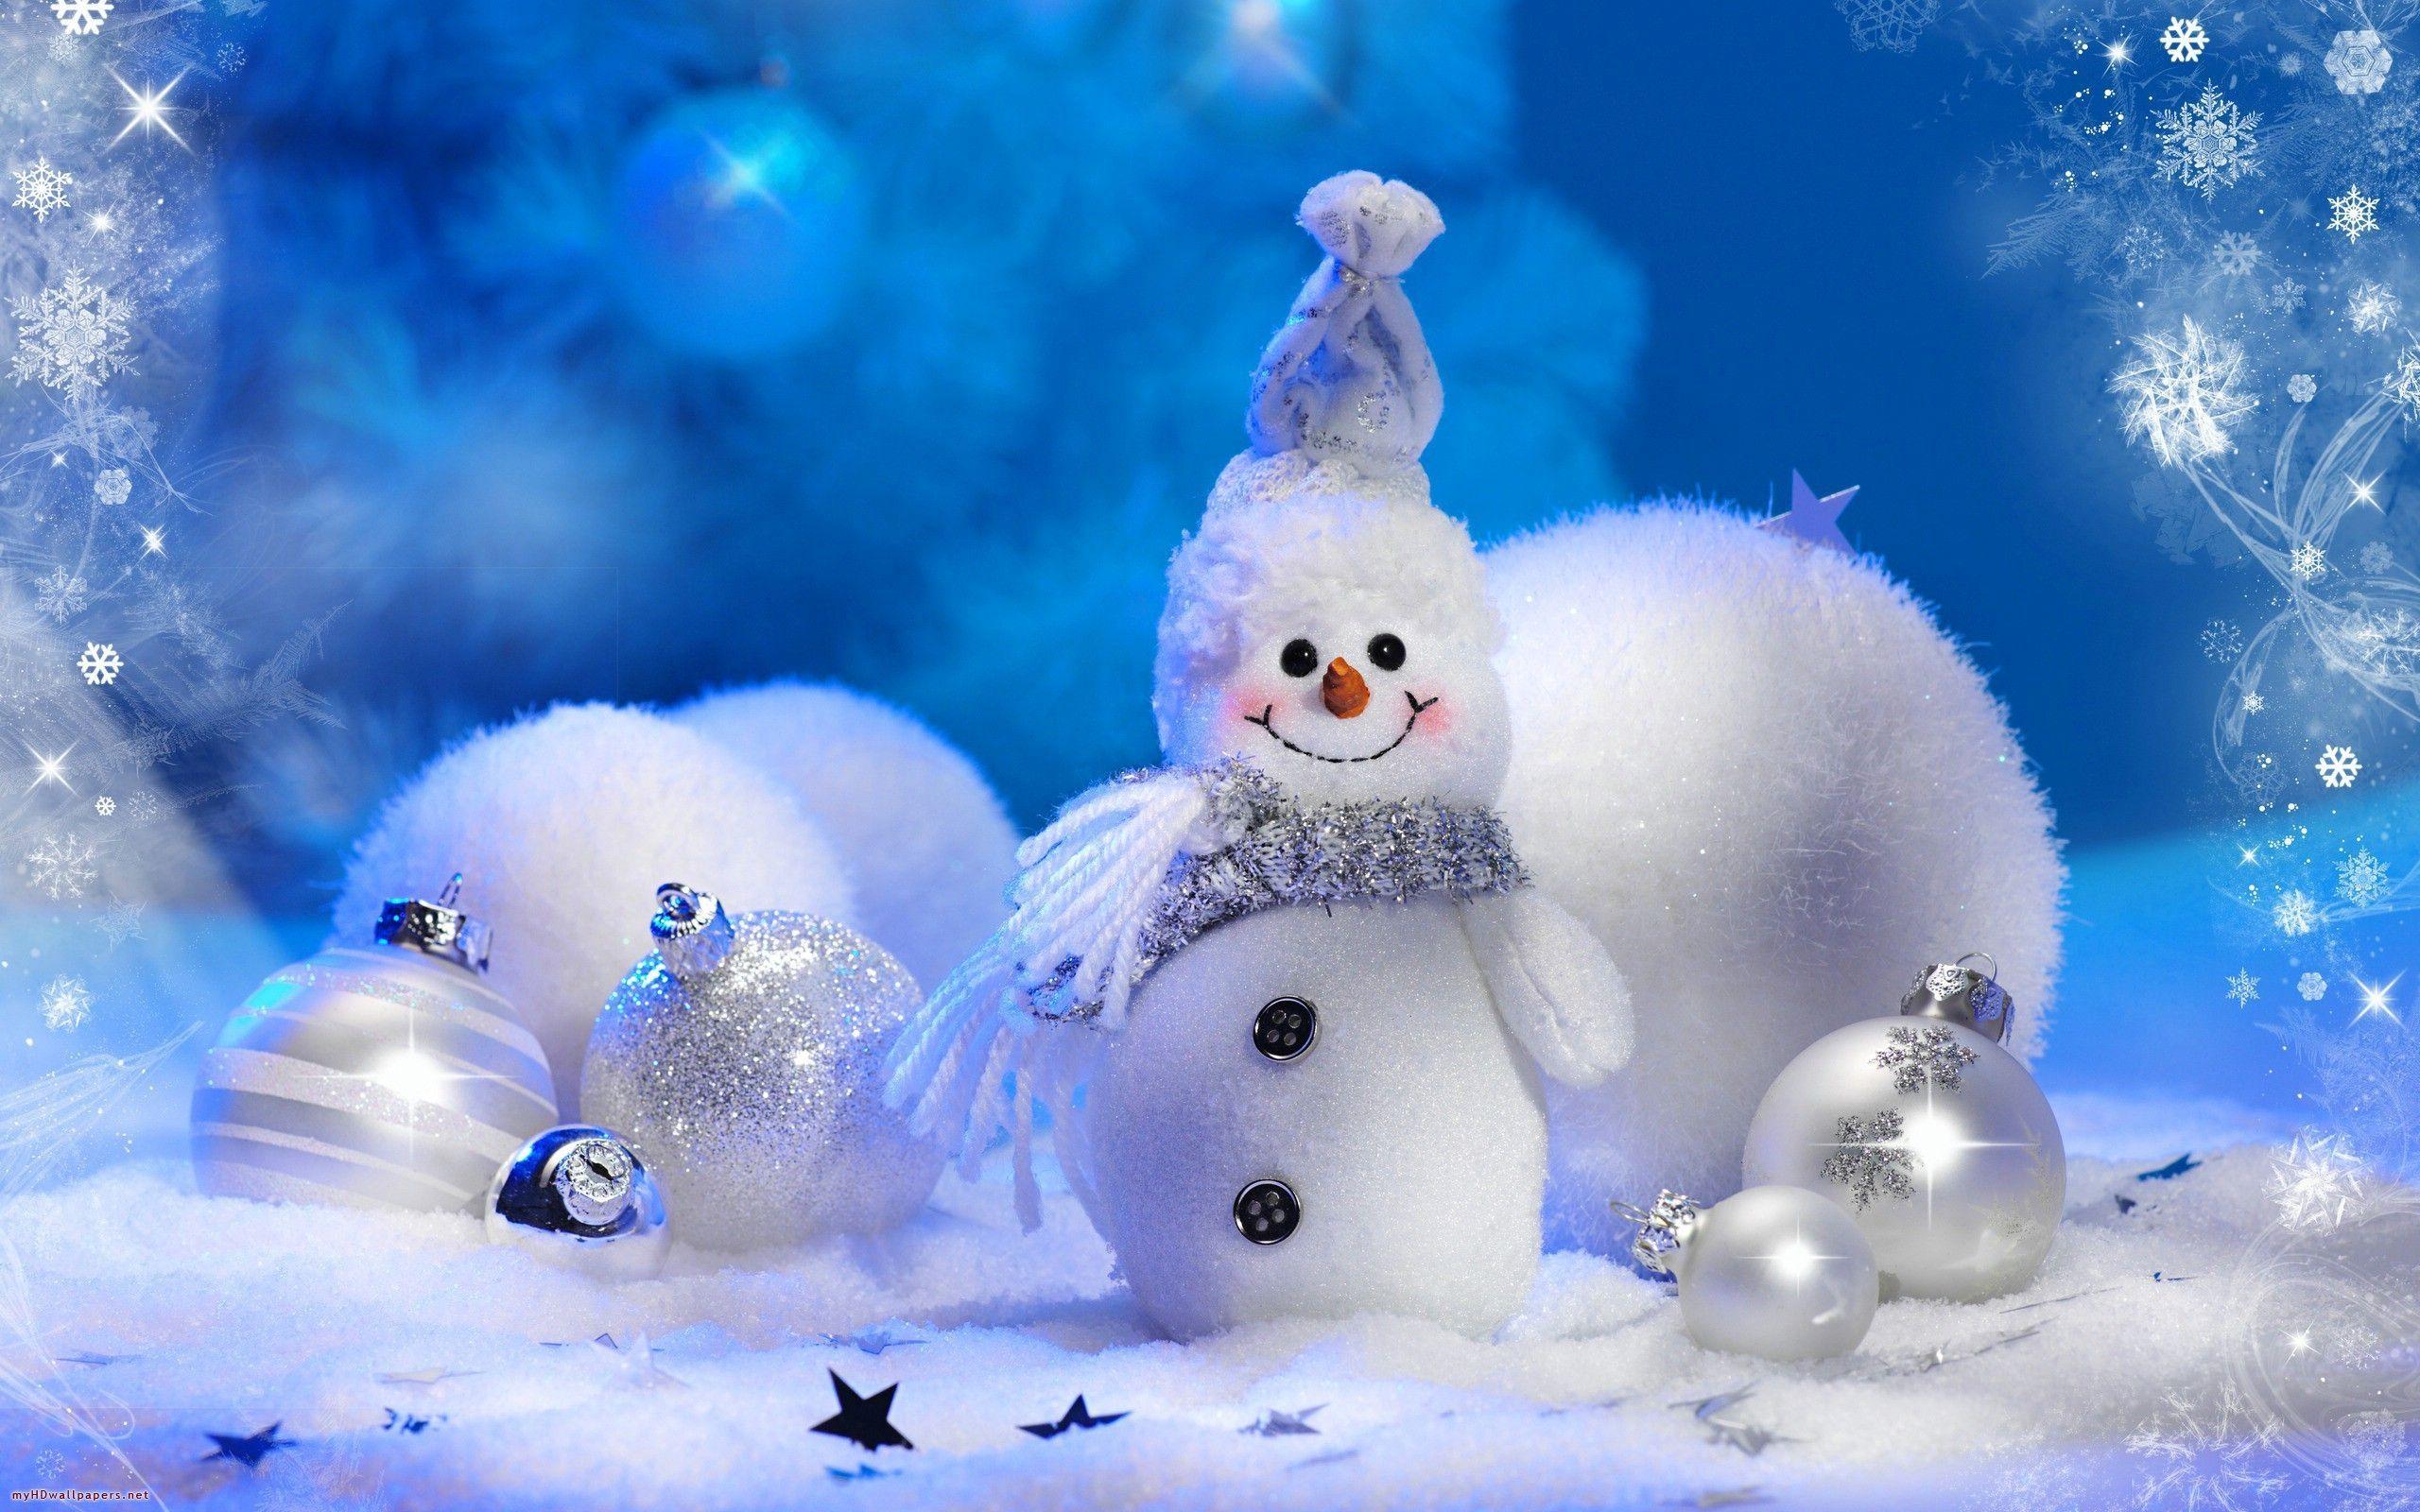 Wallpaper Snowman Cute Free Desktop HD And New 2560x1600. Animated christmas wallpaper, Snowman christmas decorations, Animated christmas